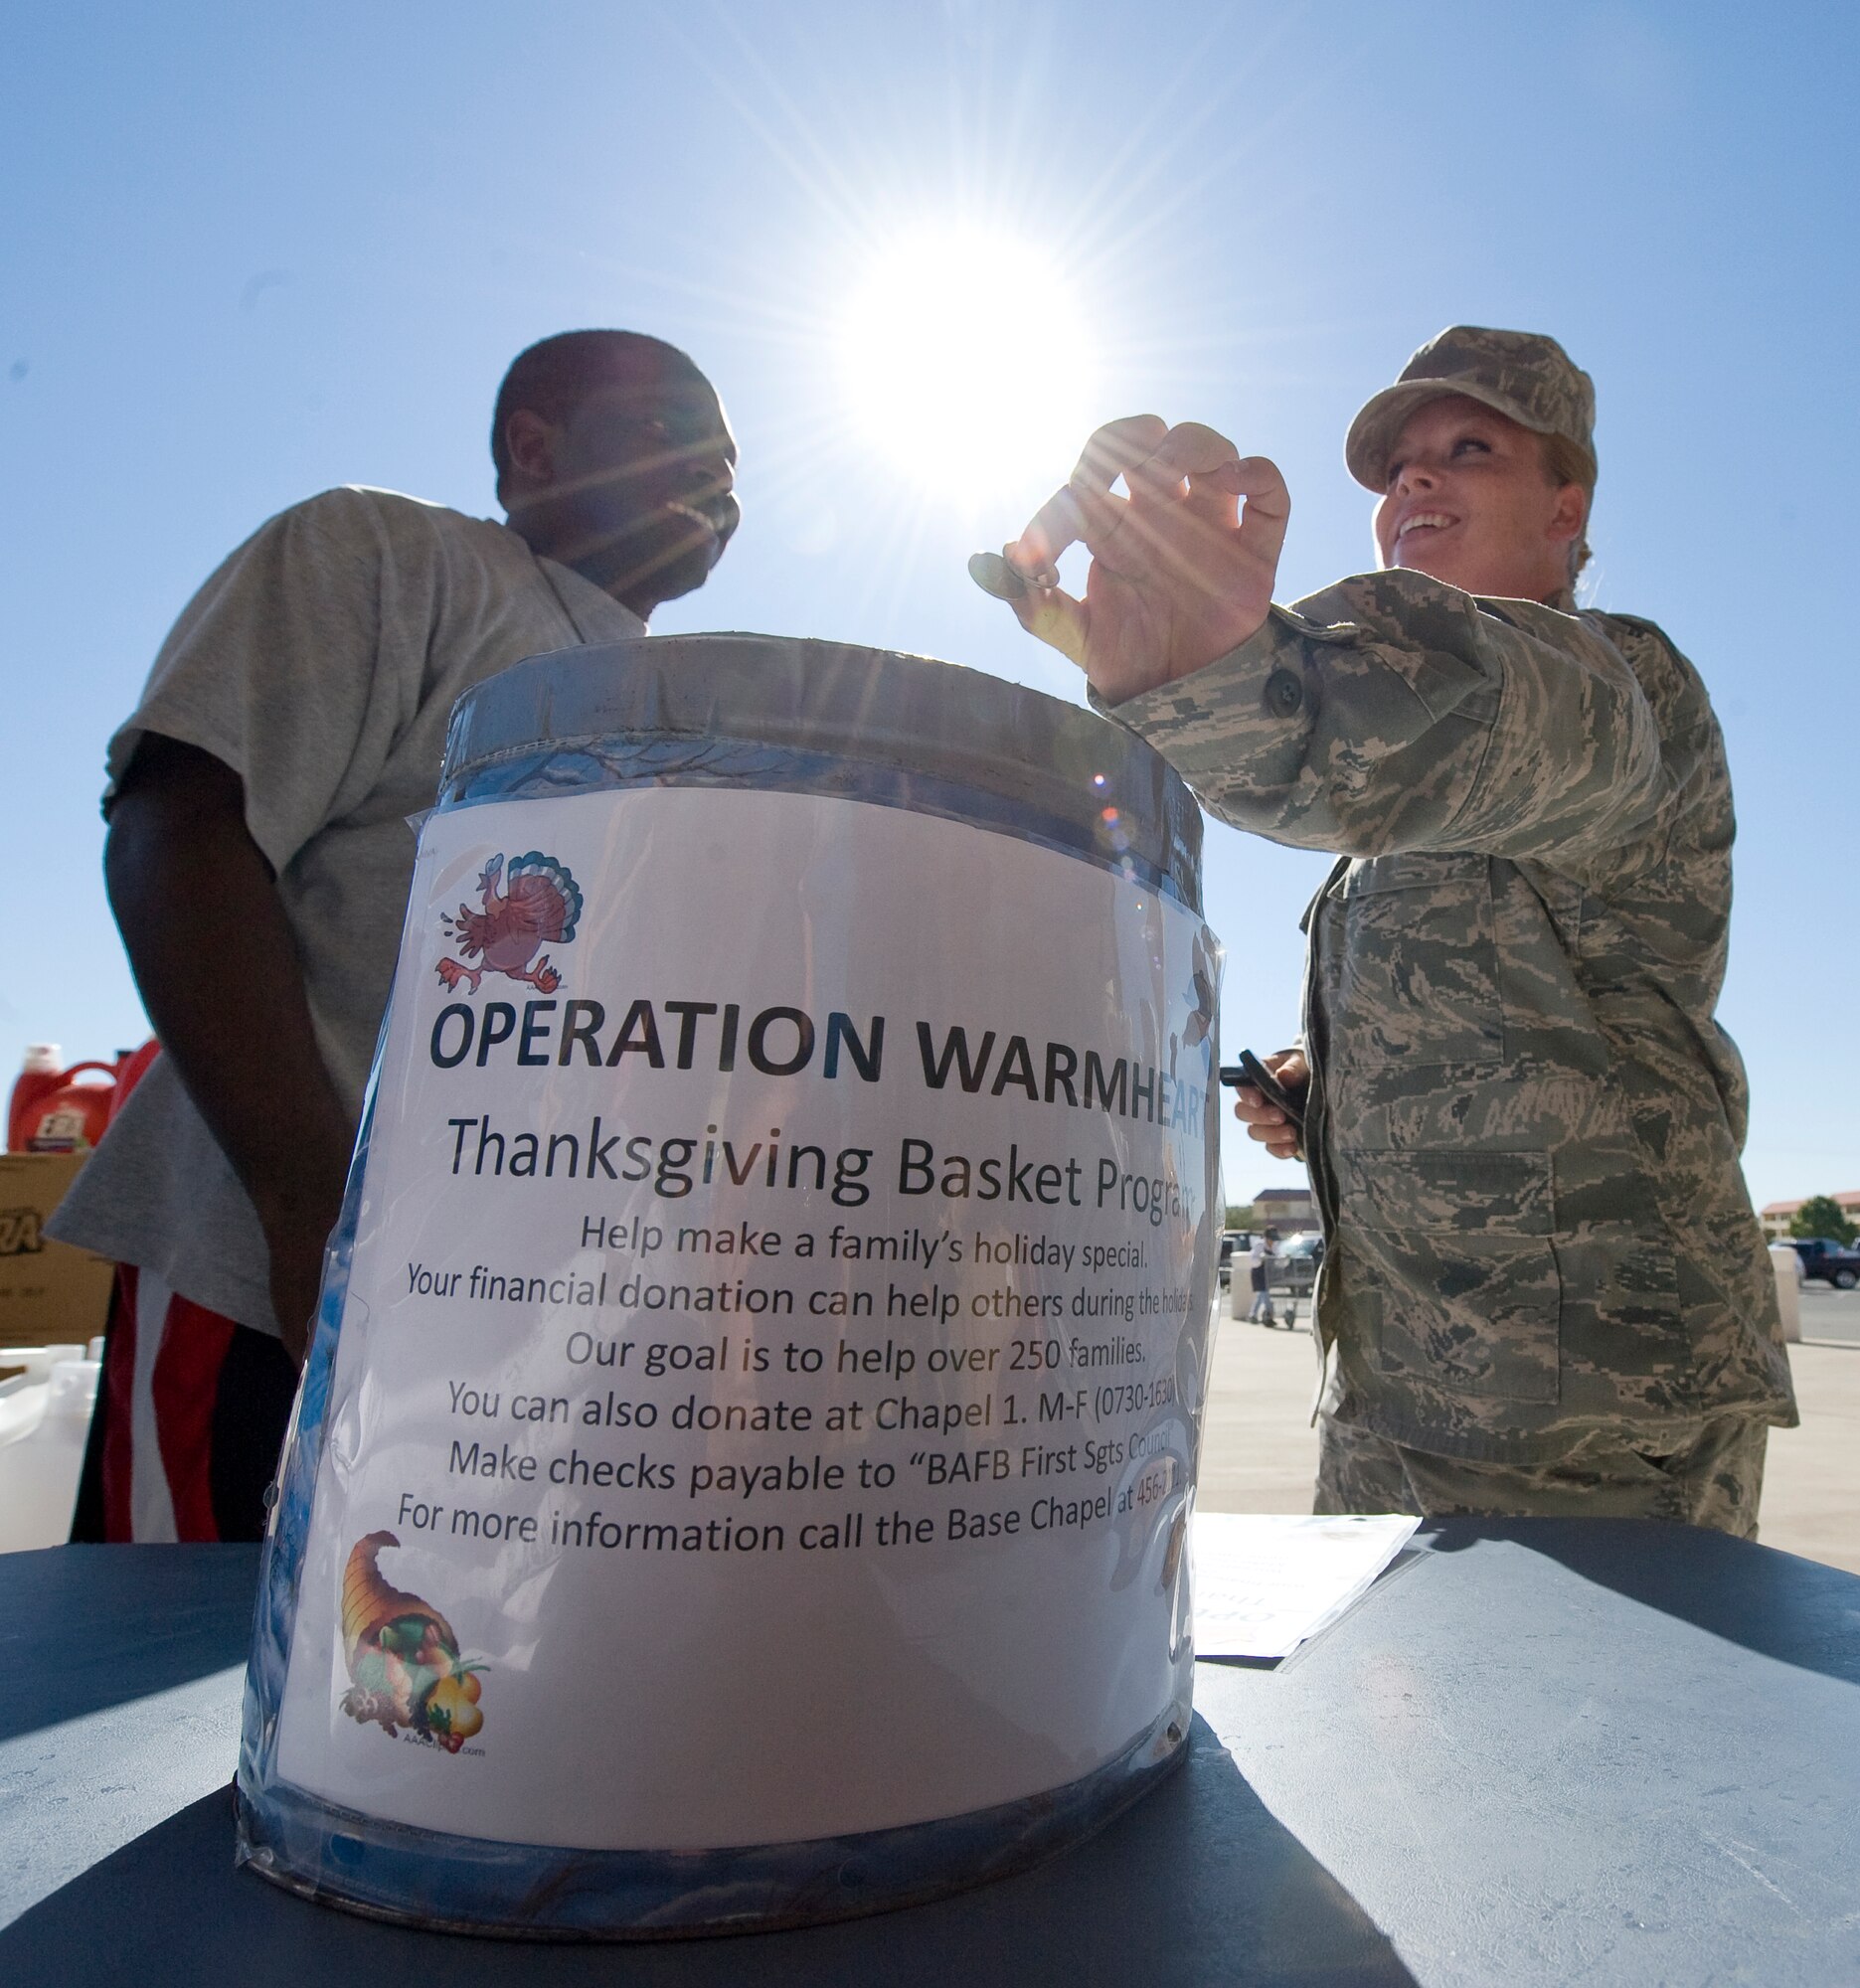 BARKSDALE AIR FORCE BASE, La. -- Senior Airman Brandi Rae, 2nd Logistics Readiness Squadron, donates money to Operation Warmheart outside the Commissary Oct. 6. Operation Warmheart is a program that provides for Airmen and their families who may need financial help during the holidays. (U.S. Air Force photo/Senior Airman Chad Warren)